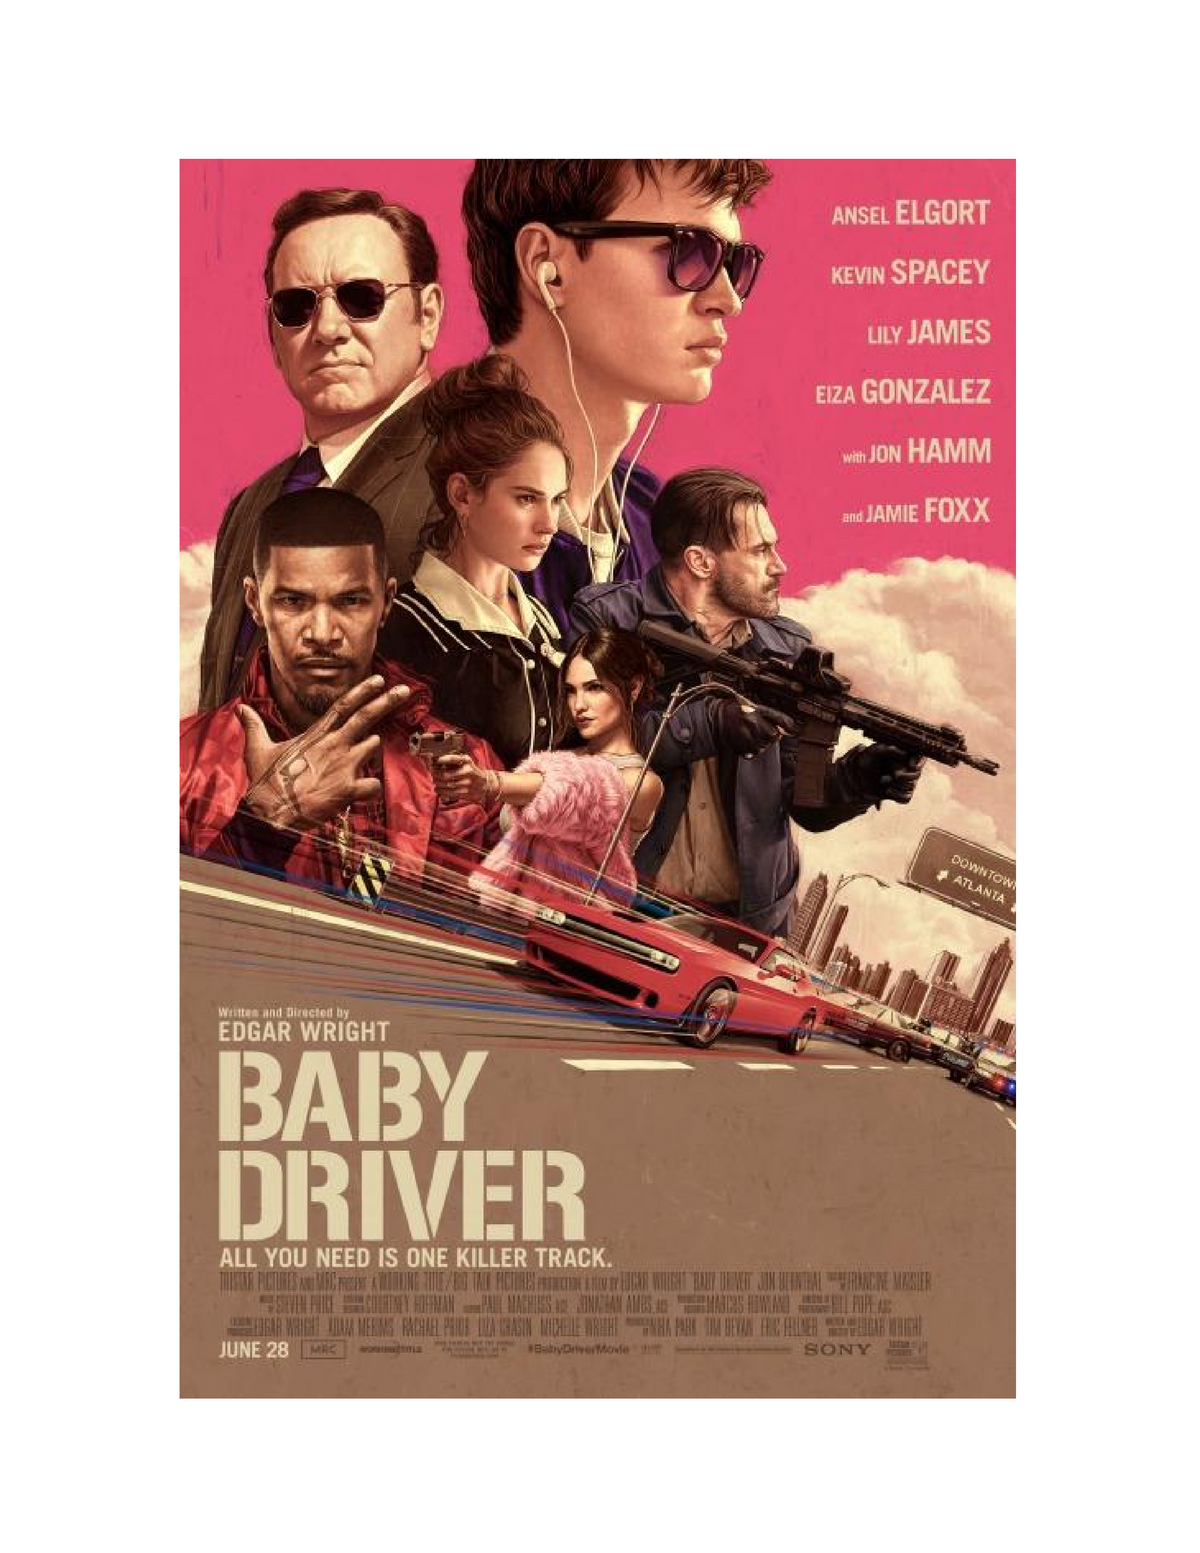 Baby Driver Script Film Theory Analysis — Emilieshoots